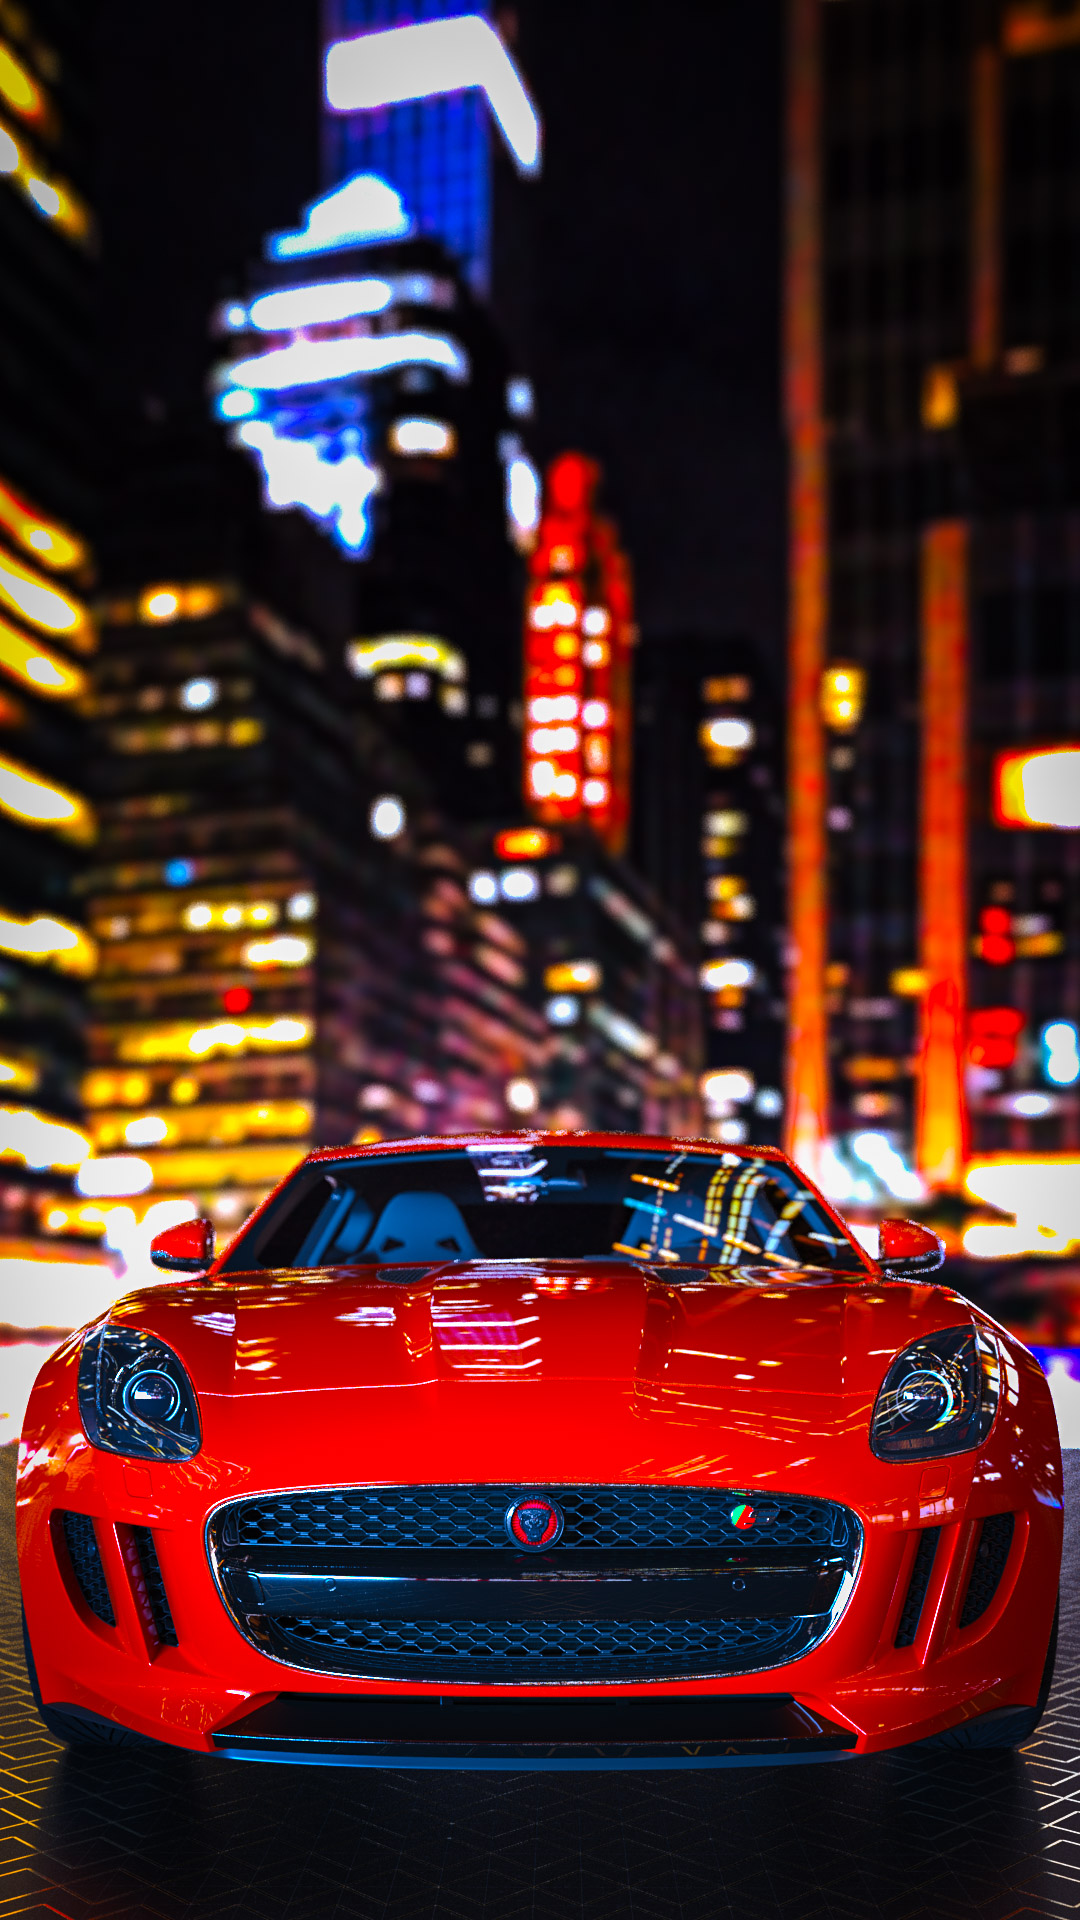 Savor the elegance of the Jaguar F-TYPE with our car wallpaper for mobile, a symbol of British luxury and design.